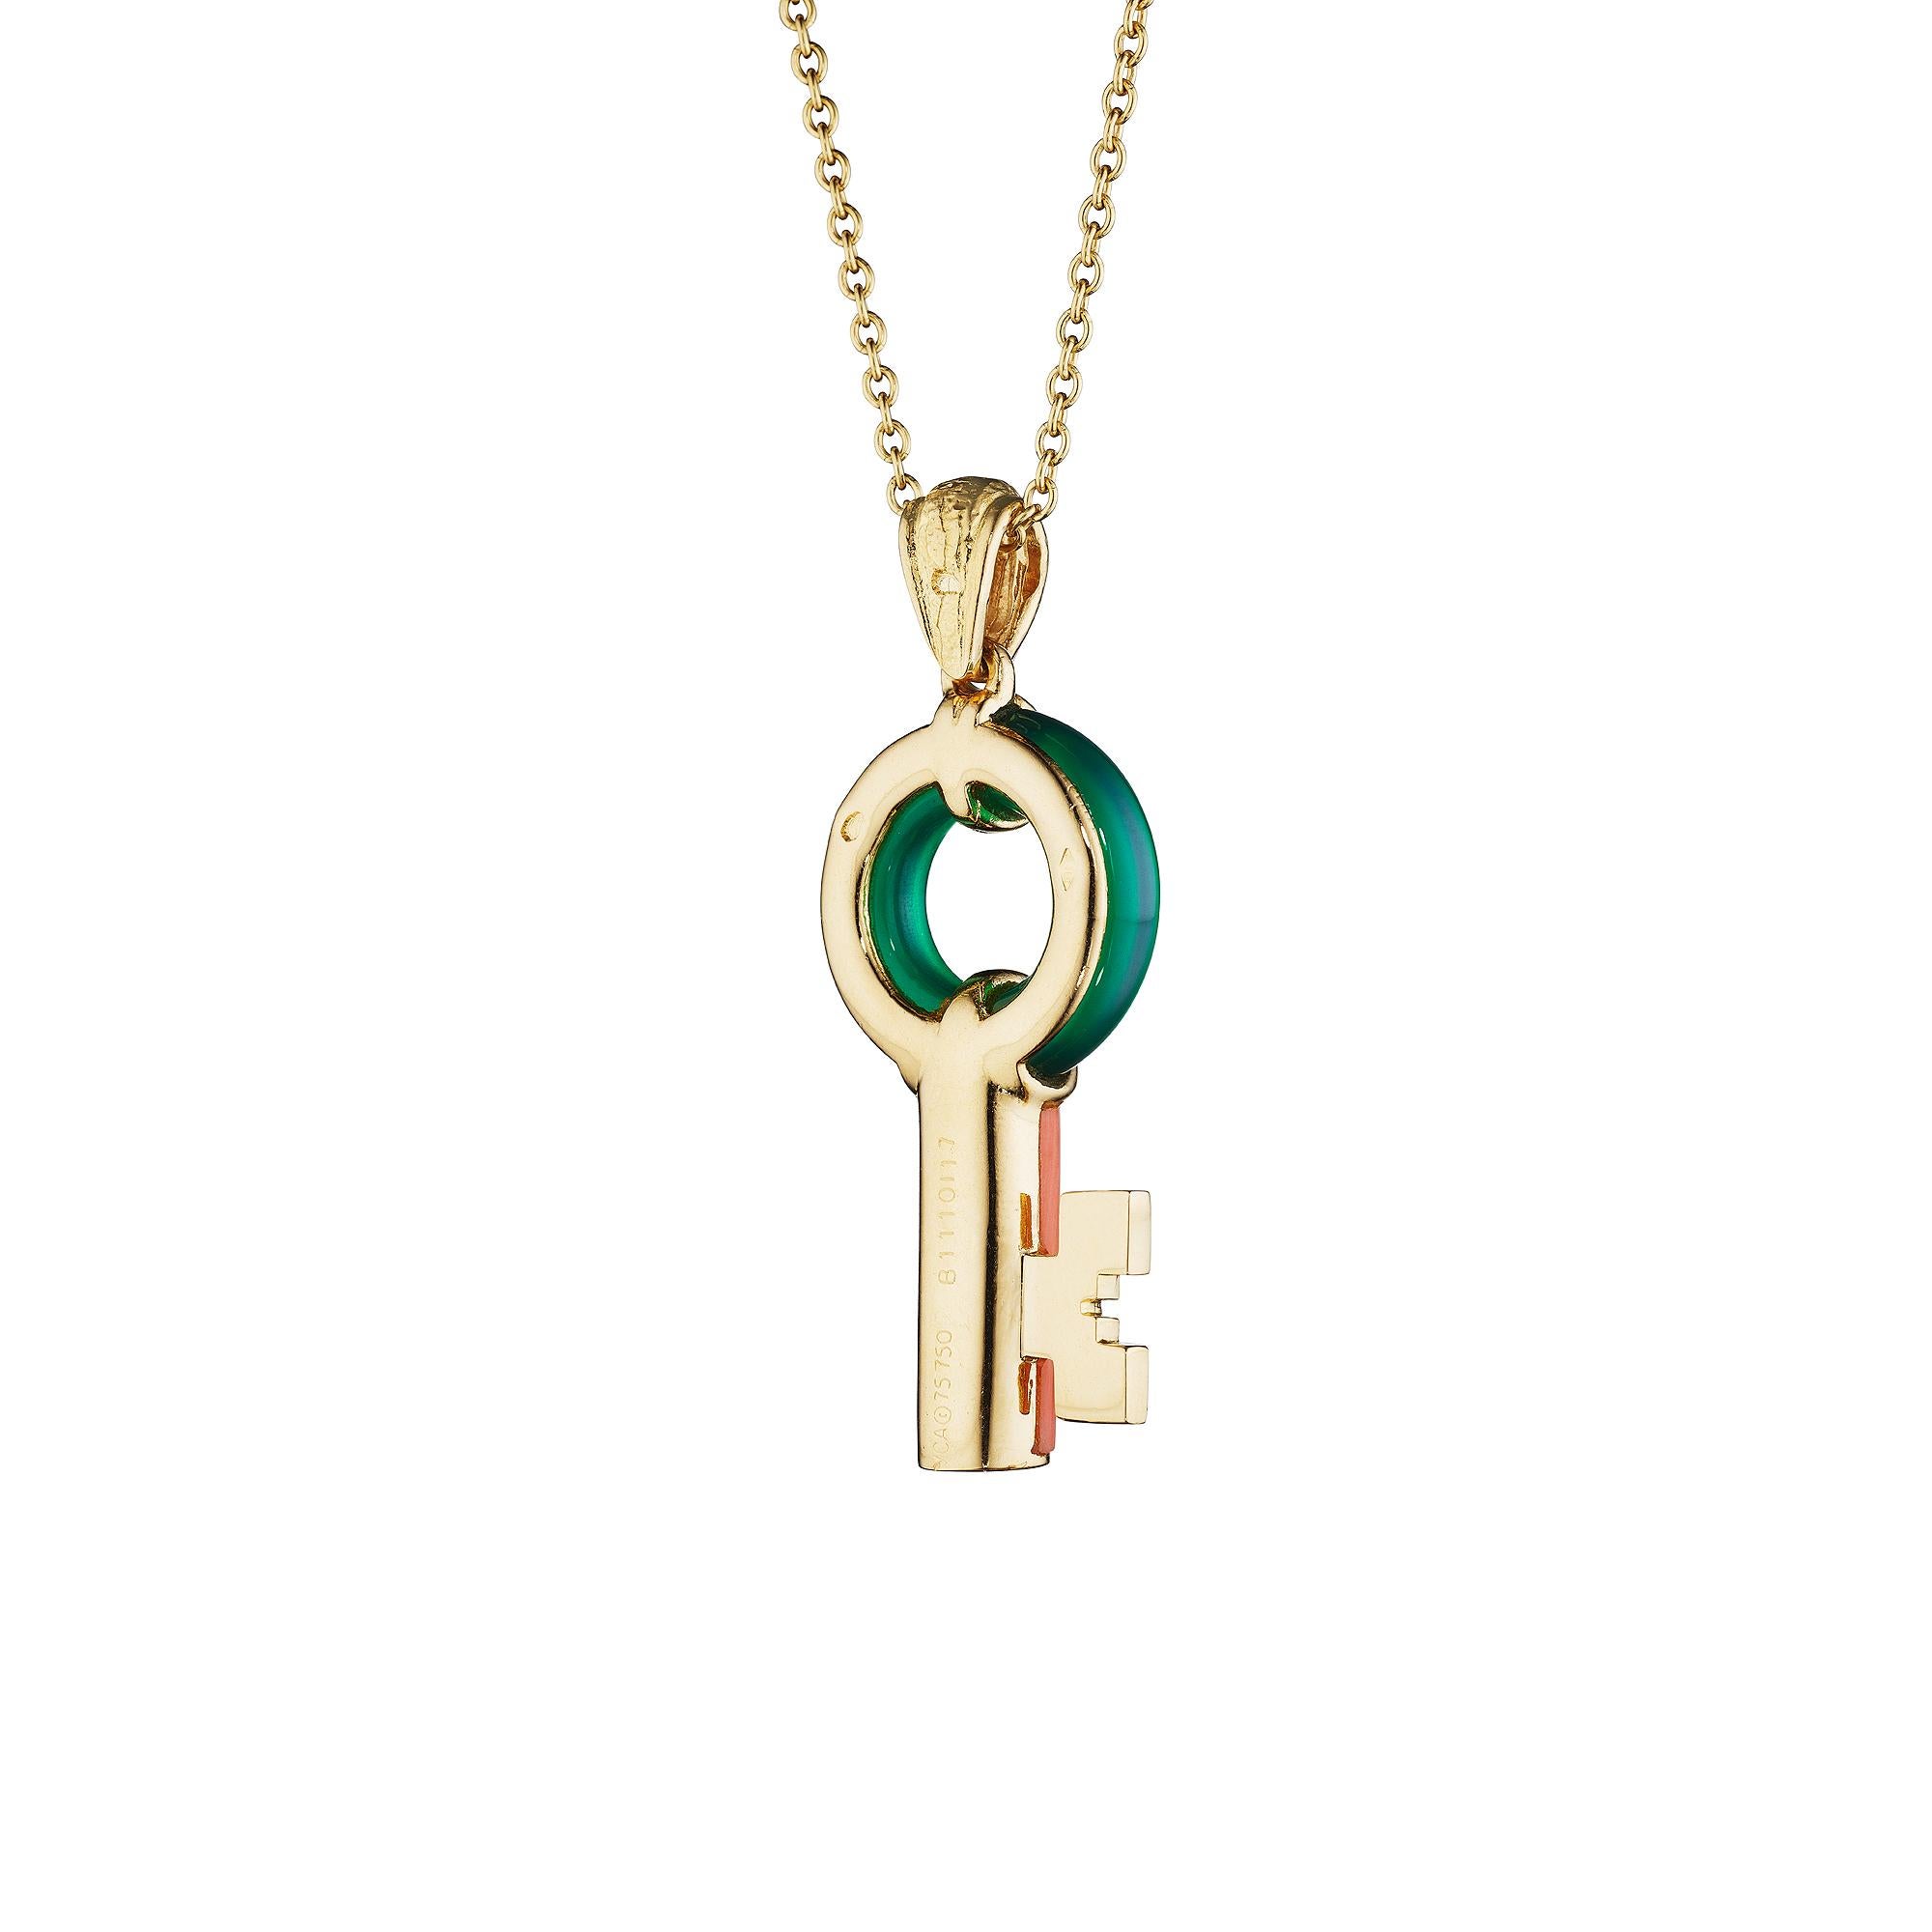 Wear a key to your heart with this Van Cleef & Arpels vintage, circa 1970, pendant necklace.  The 1 1/2